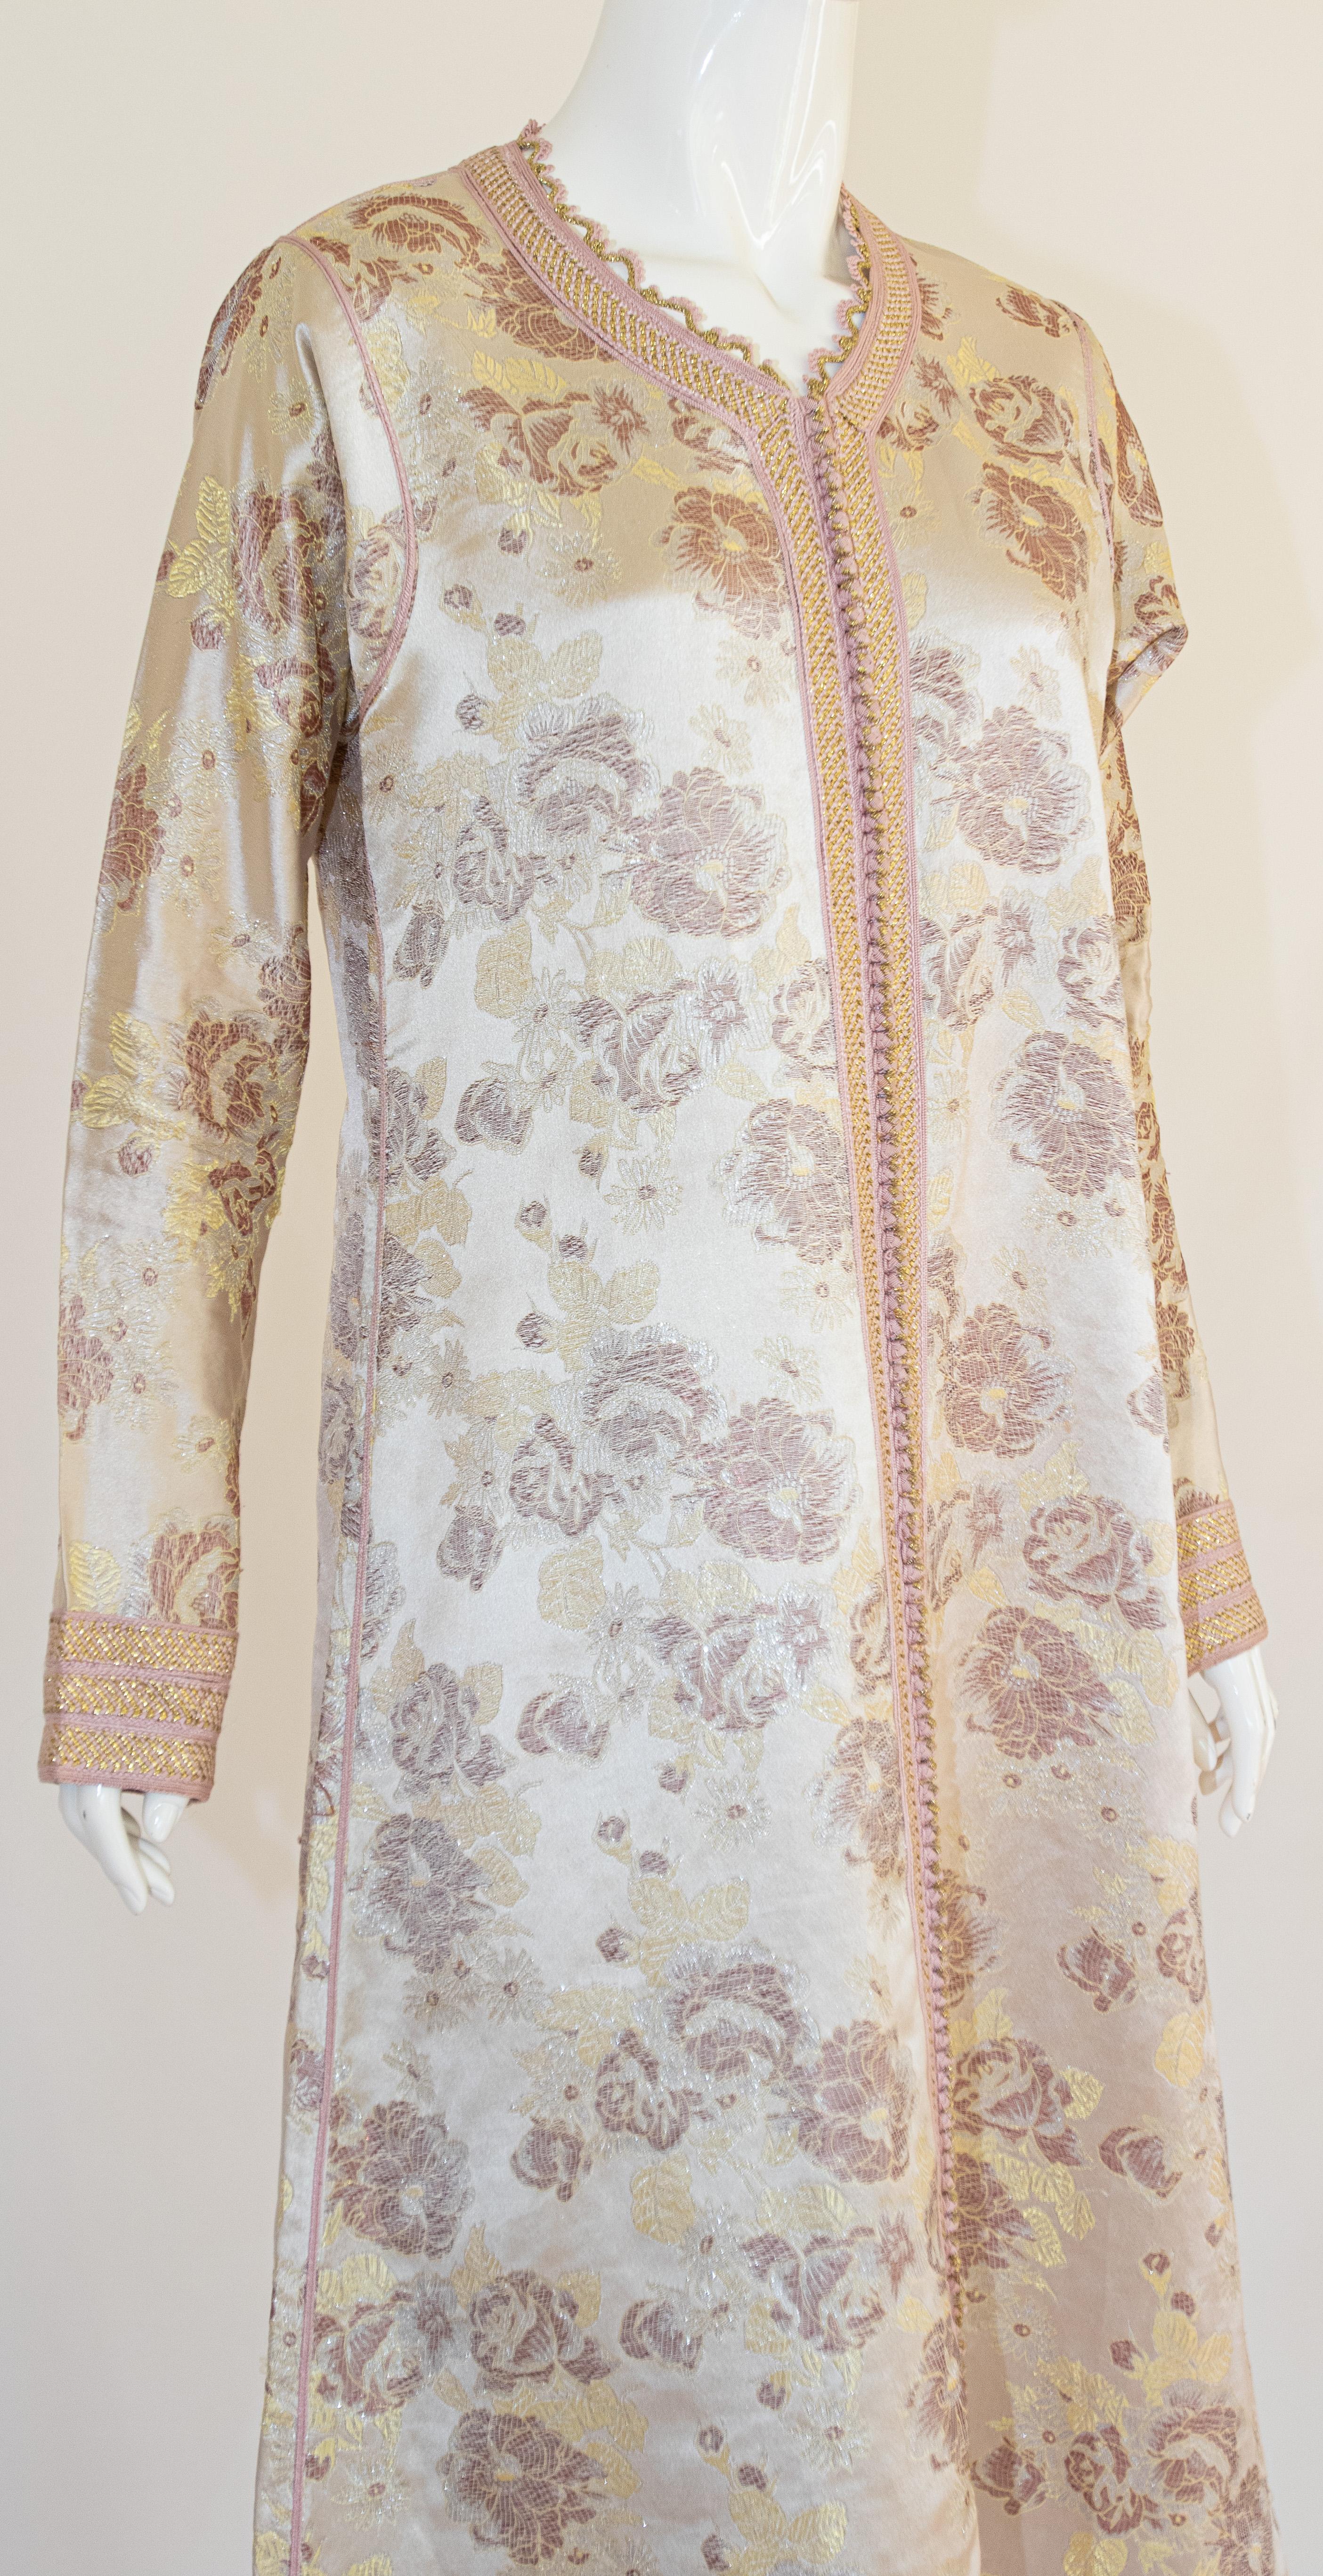 Vintage Moroccan Caftan Gold Damask Embroidered, Vintage, 1960s In Good Condition For Sale In North Hollywood, CA